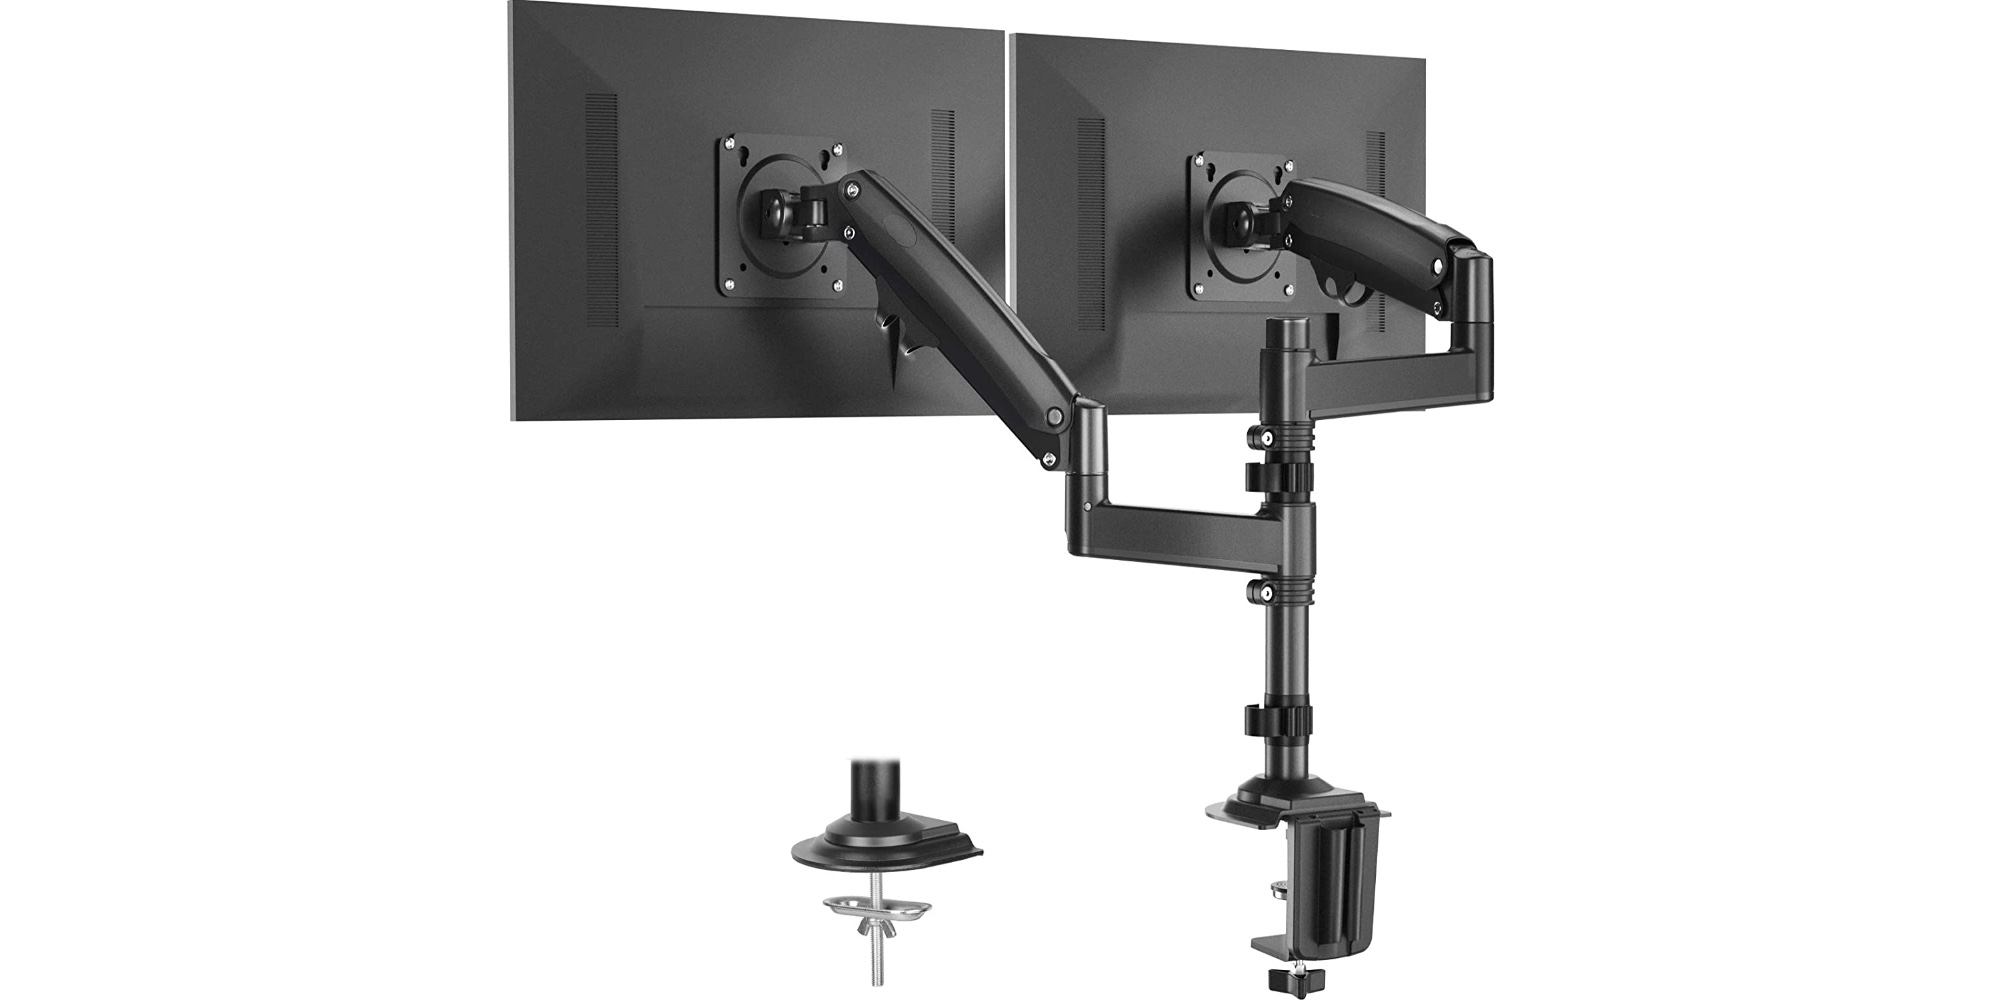 Huanuo S Full Motion 32 Inch Dual Monitor Mount Plunges To 35 Shipped Save 42 9to5toys